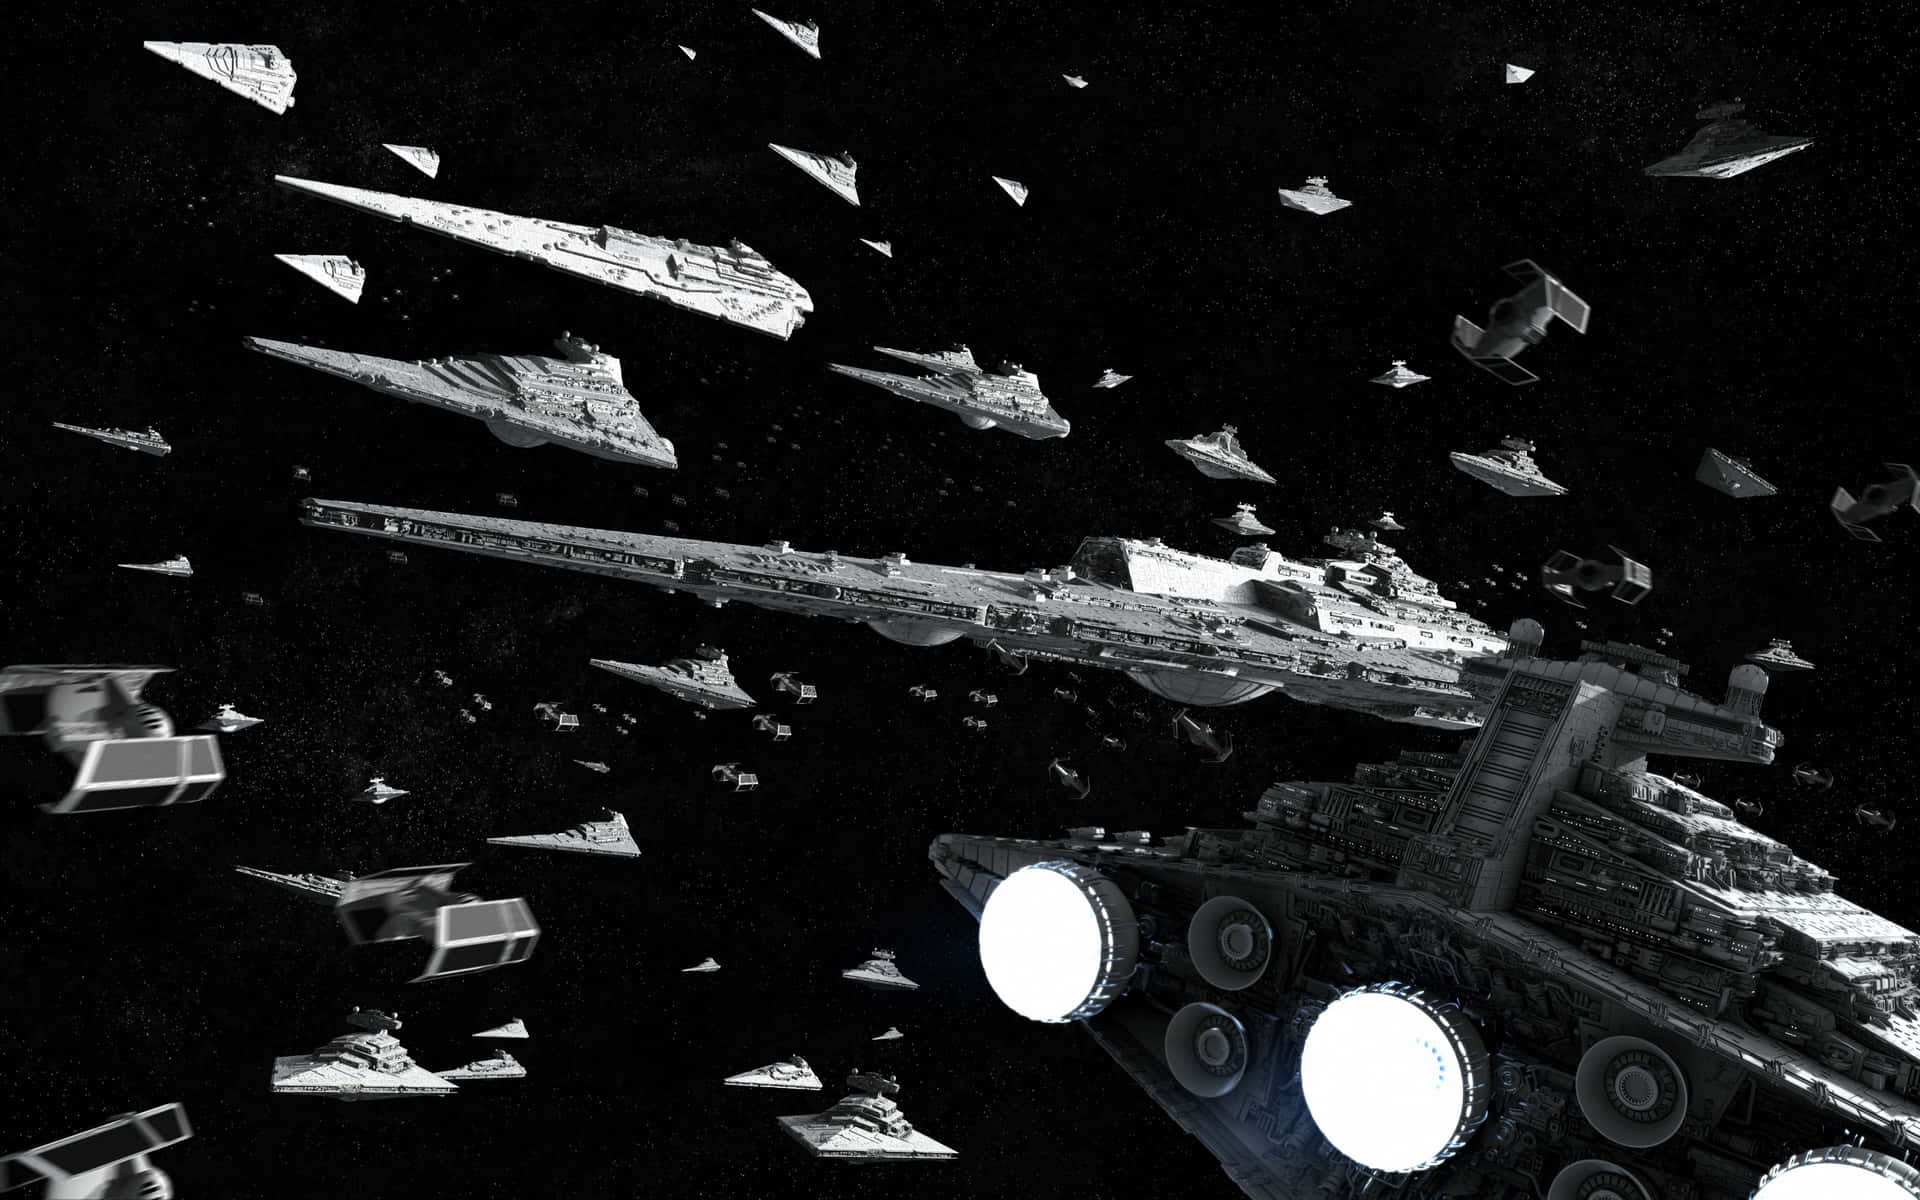 Black And White Aesthetic Spaceships Wallpaper